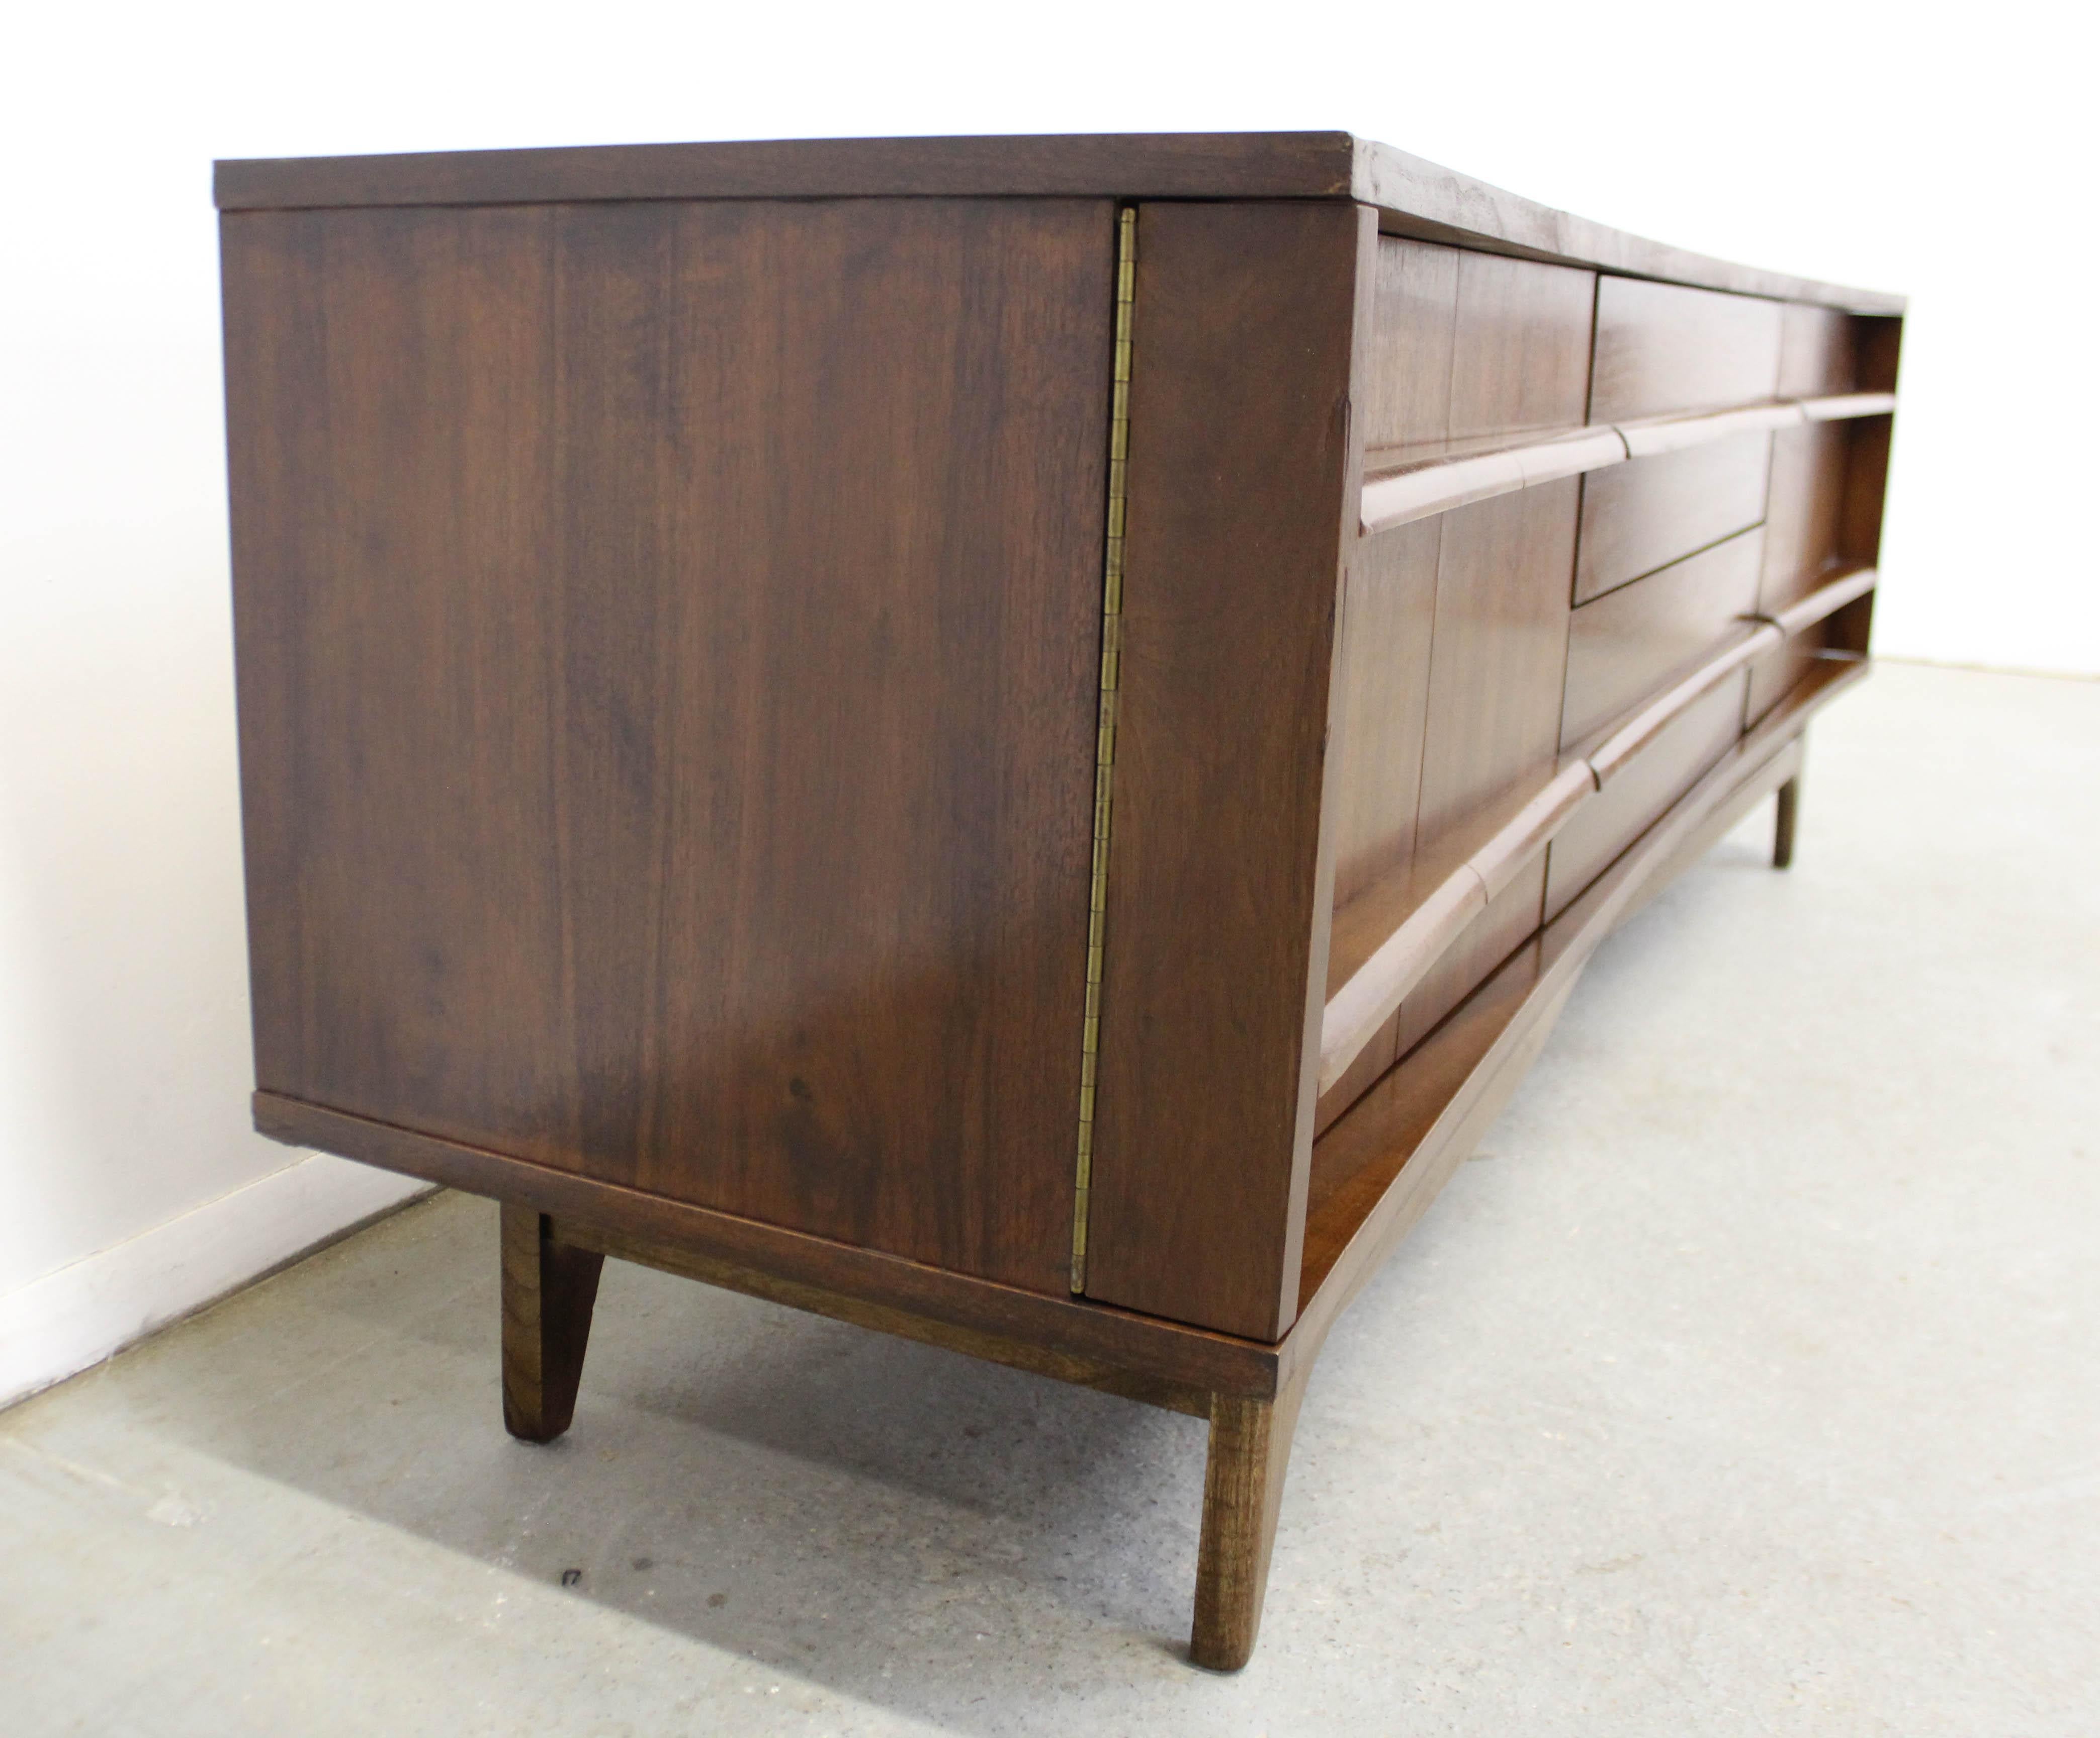 Mid-20th Century  Mid-Century Modern Concave Front Walnut Credenza by Young Mfg. Co.